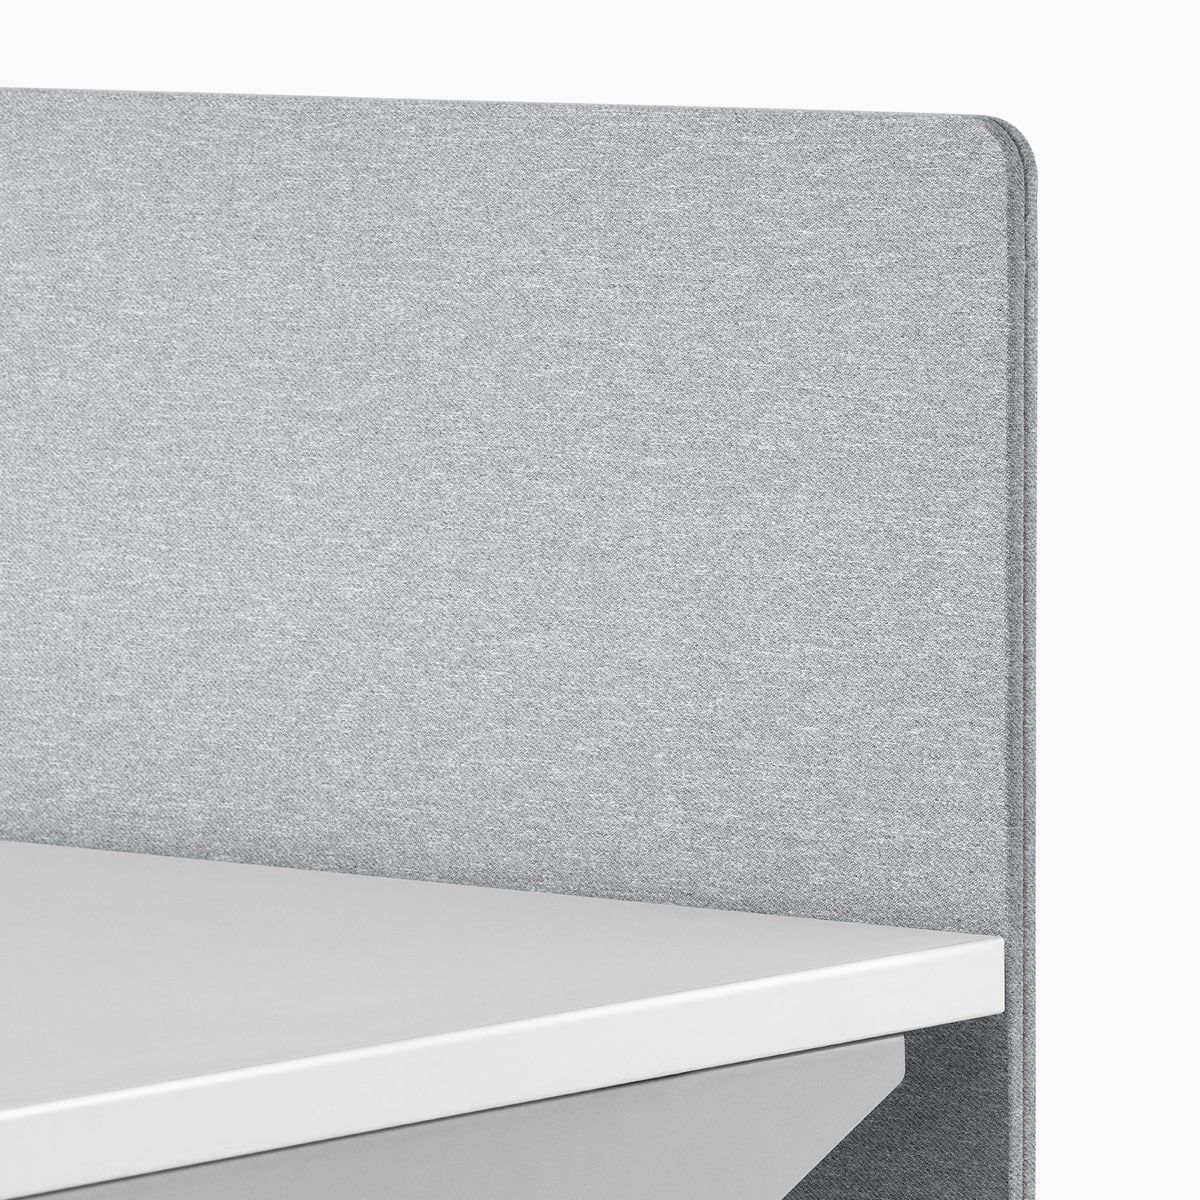 A close-up view of a gray fabric screen attached to the surface of a Nevi standing desk.